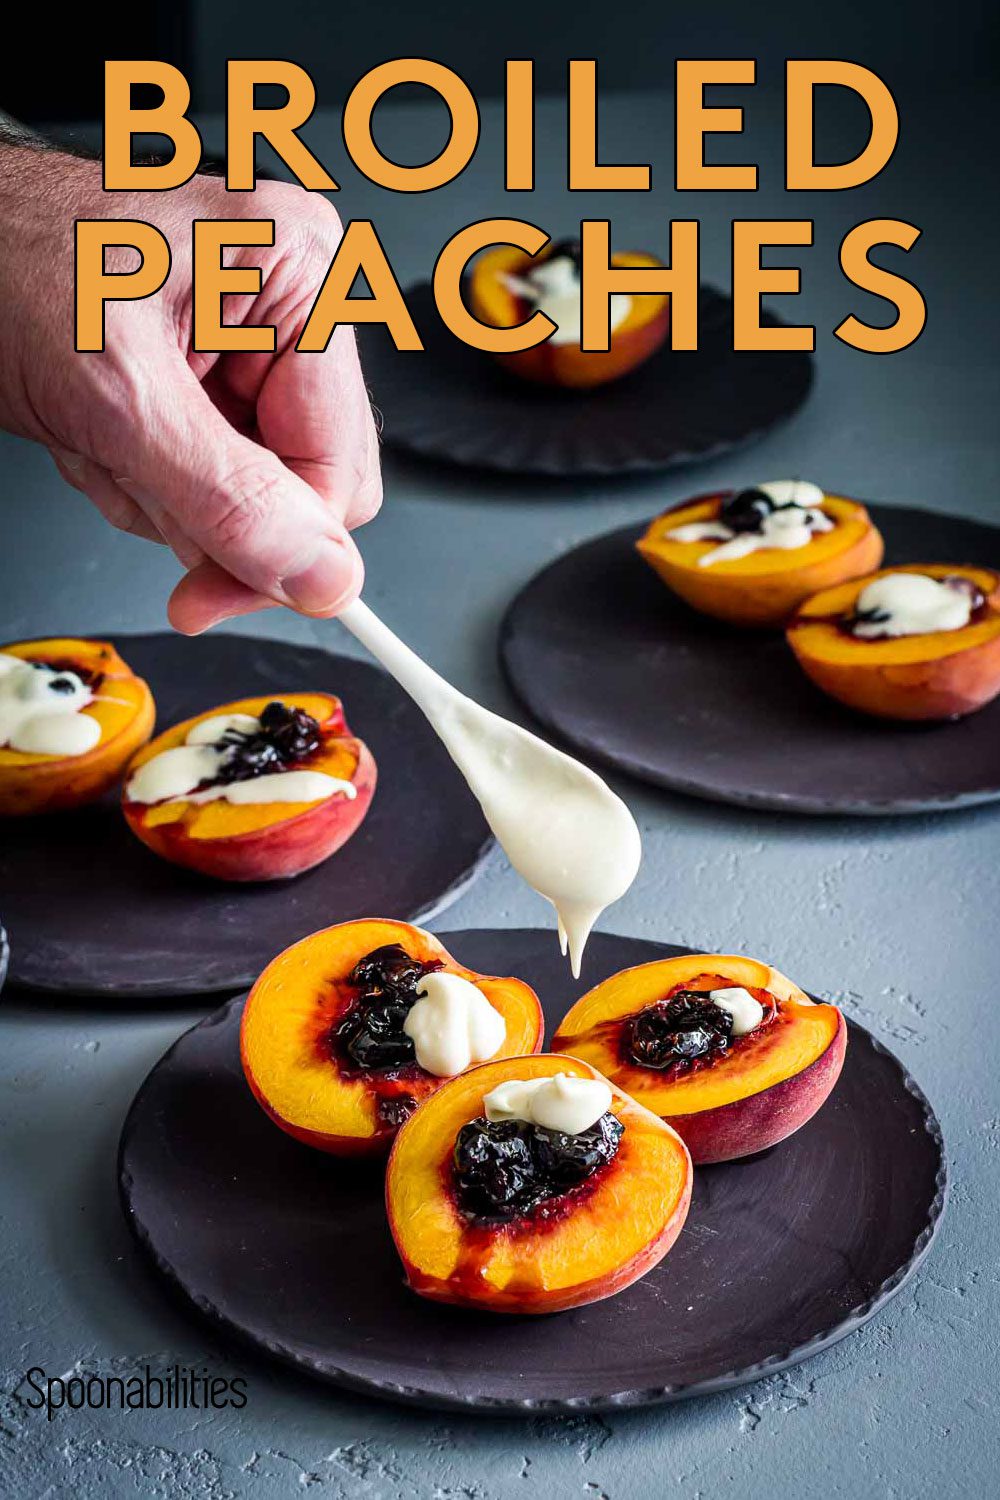 Broiled Peaches with Black Cherry Preserves and Crème Fraiche